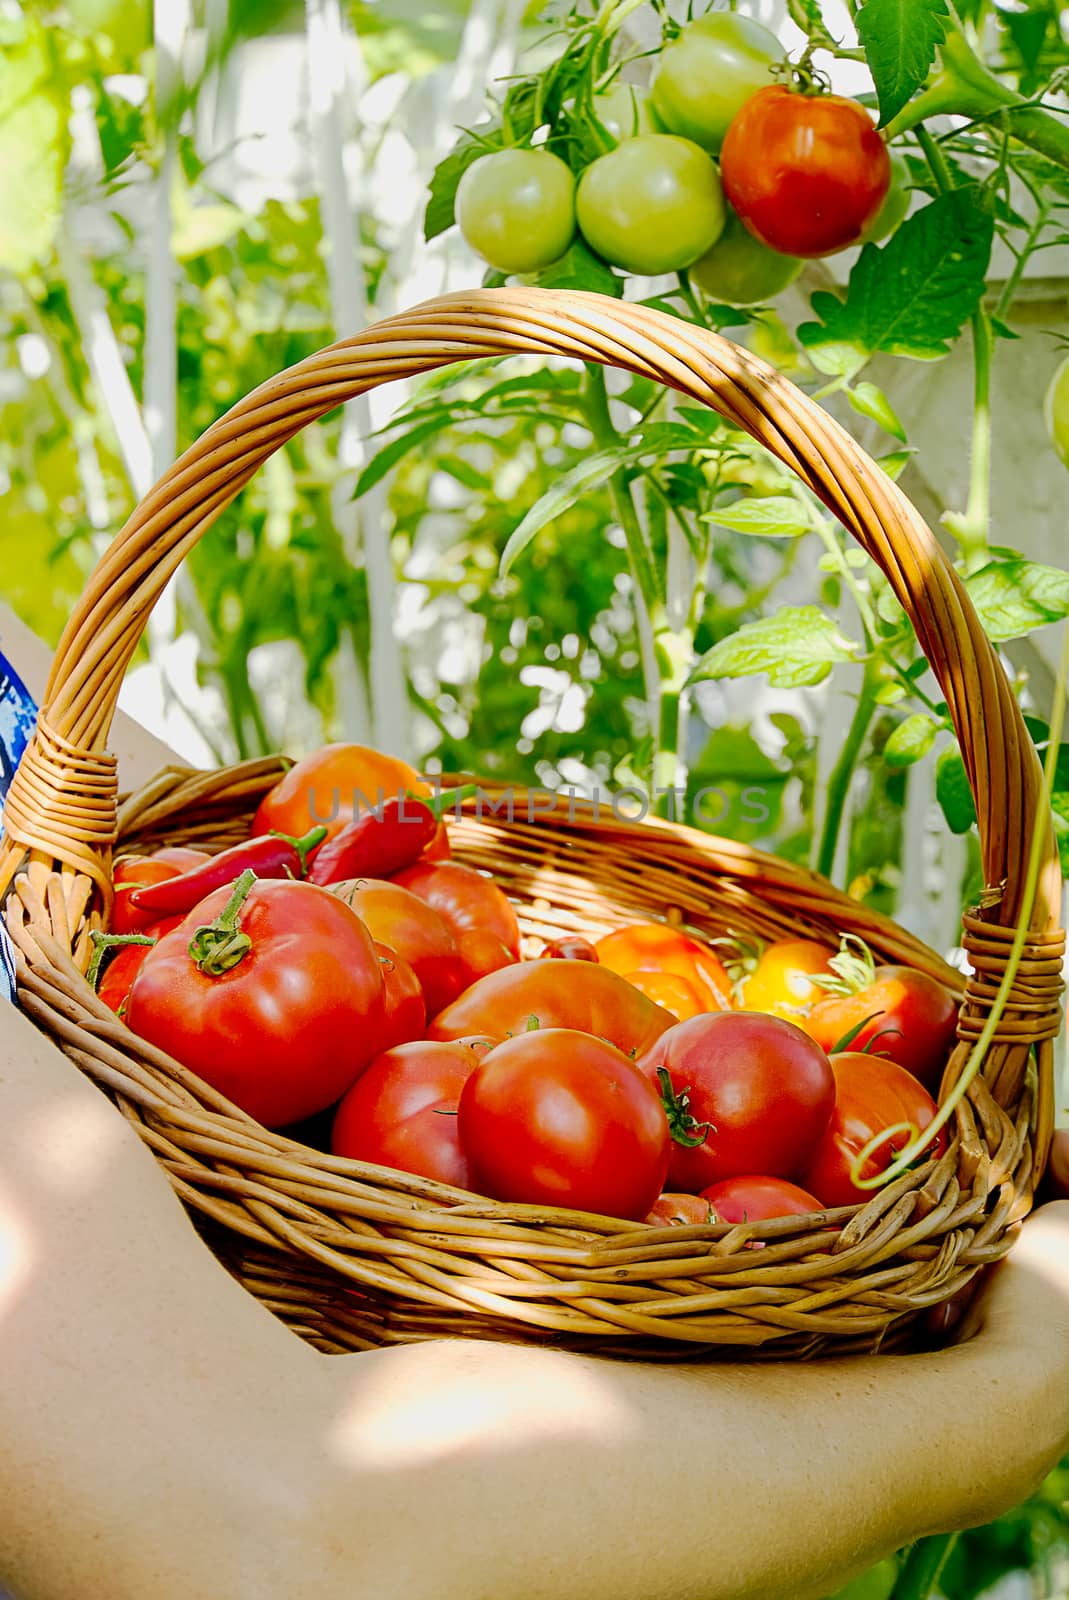 in the greenhouse the girl's hand collects ripe red ecological tomatoes into a wicker basket. eco food home gardening concept. by PhotoTime